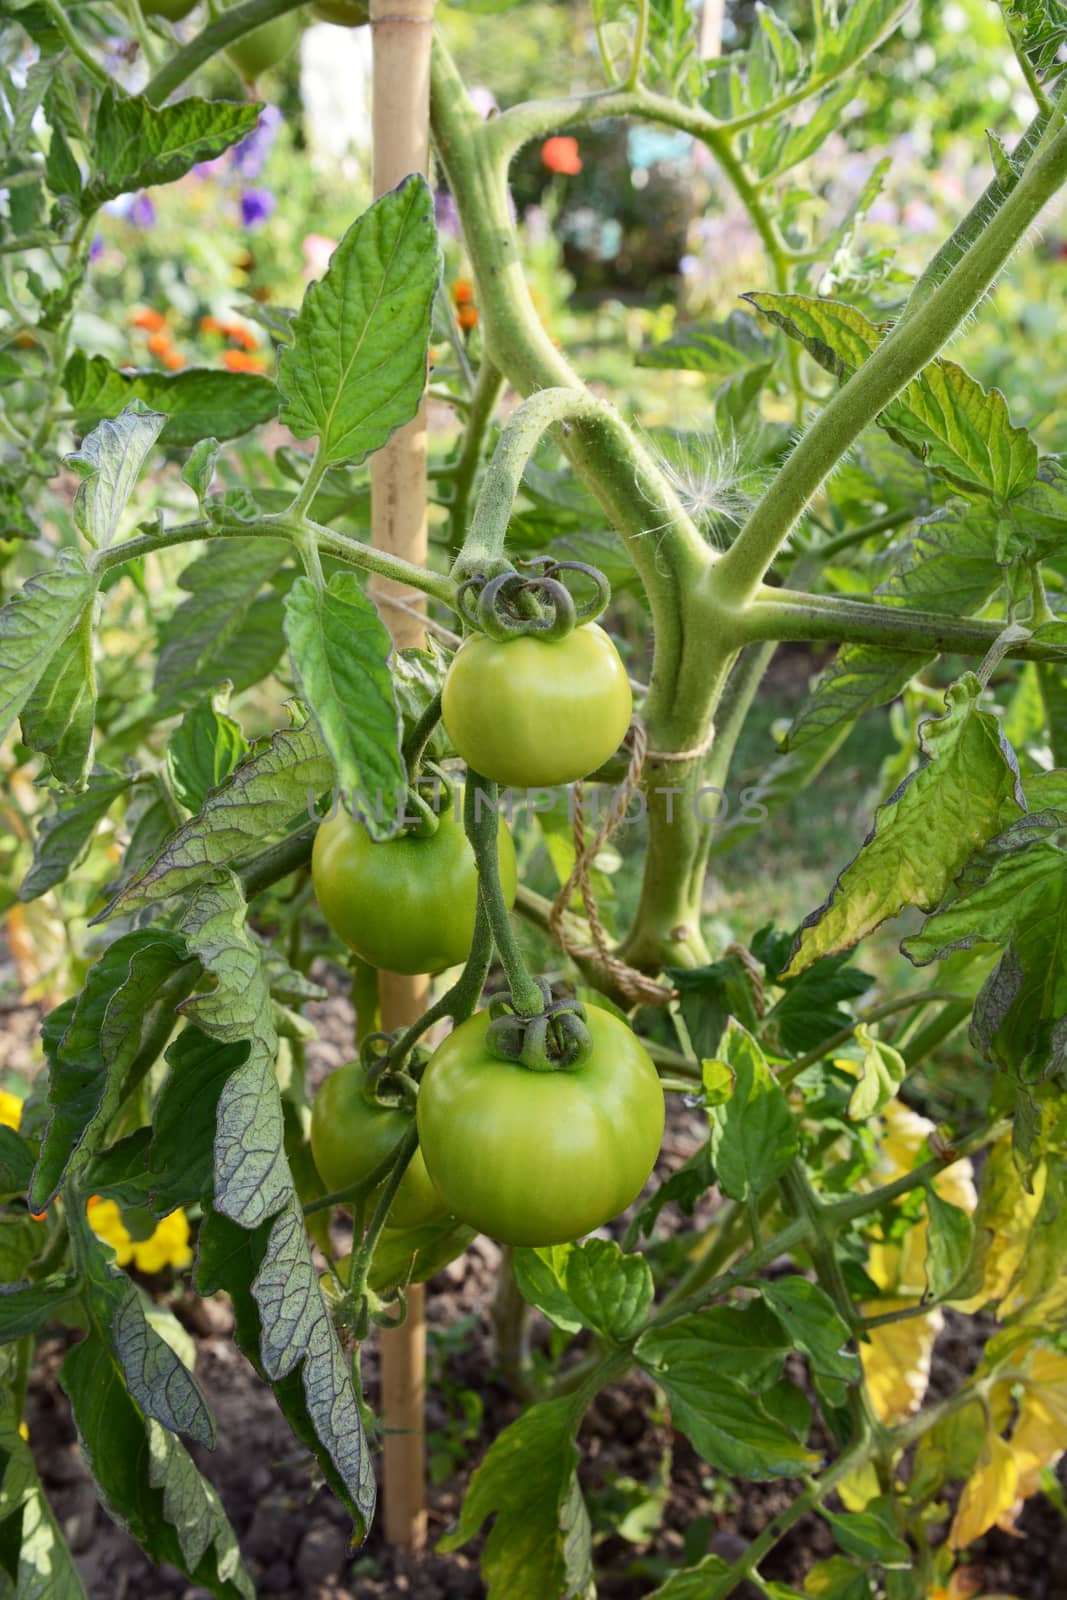 Green unripe Ferline tomatoes grow on the vine of an indeterminate tomato plant in a rural allotment. Solanum lycopersicum L.